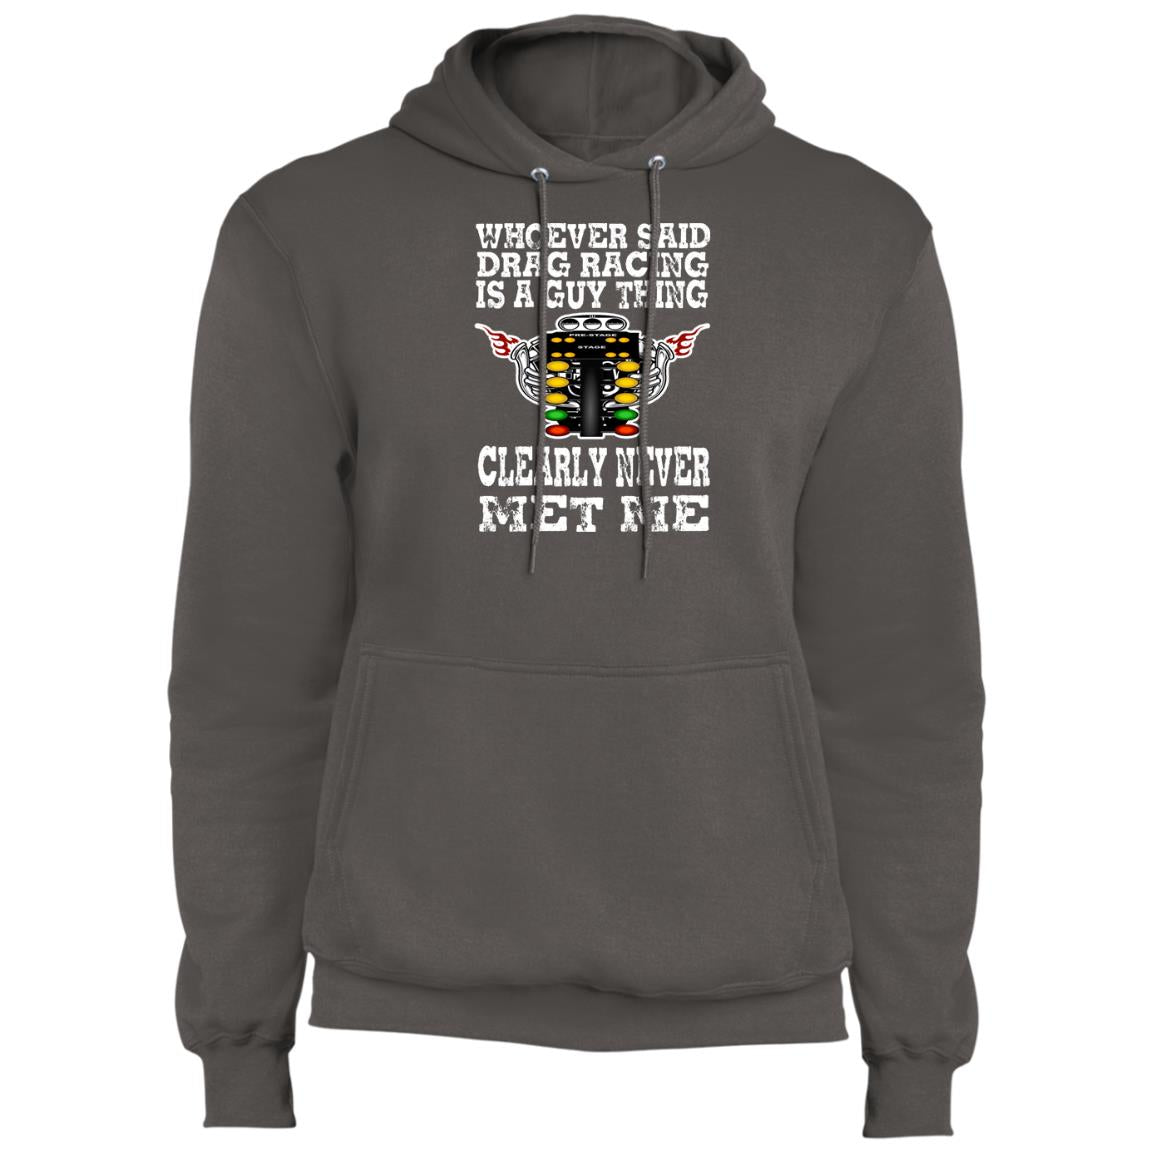 Whoever Said Drag Racing Is A Guy Thing Core Fleece Pullover Hoodie